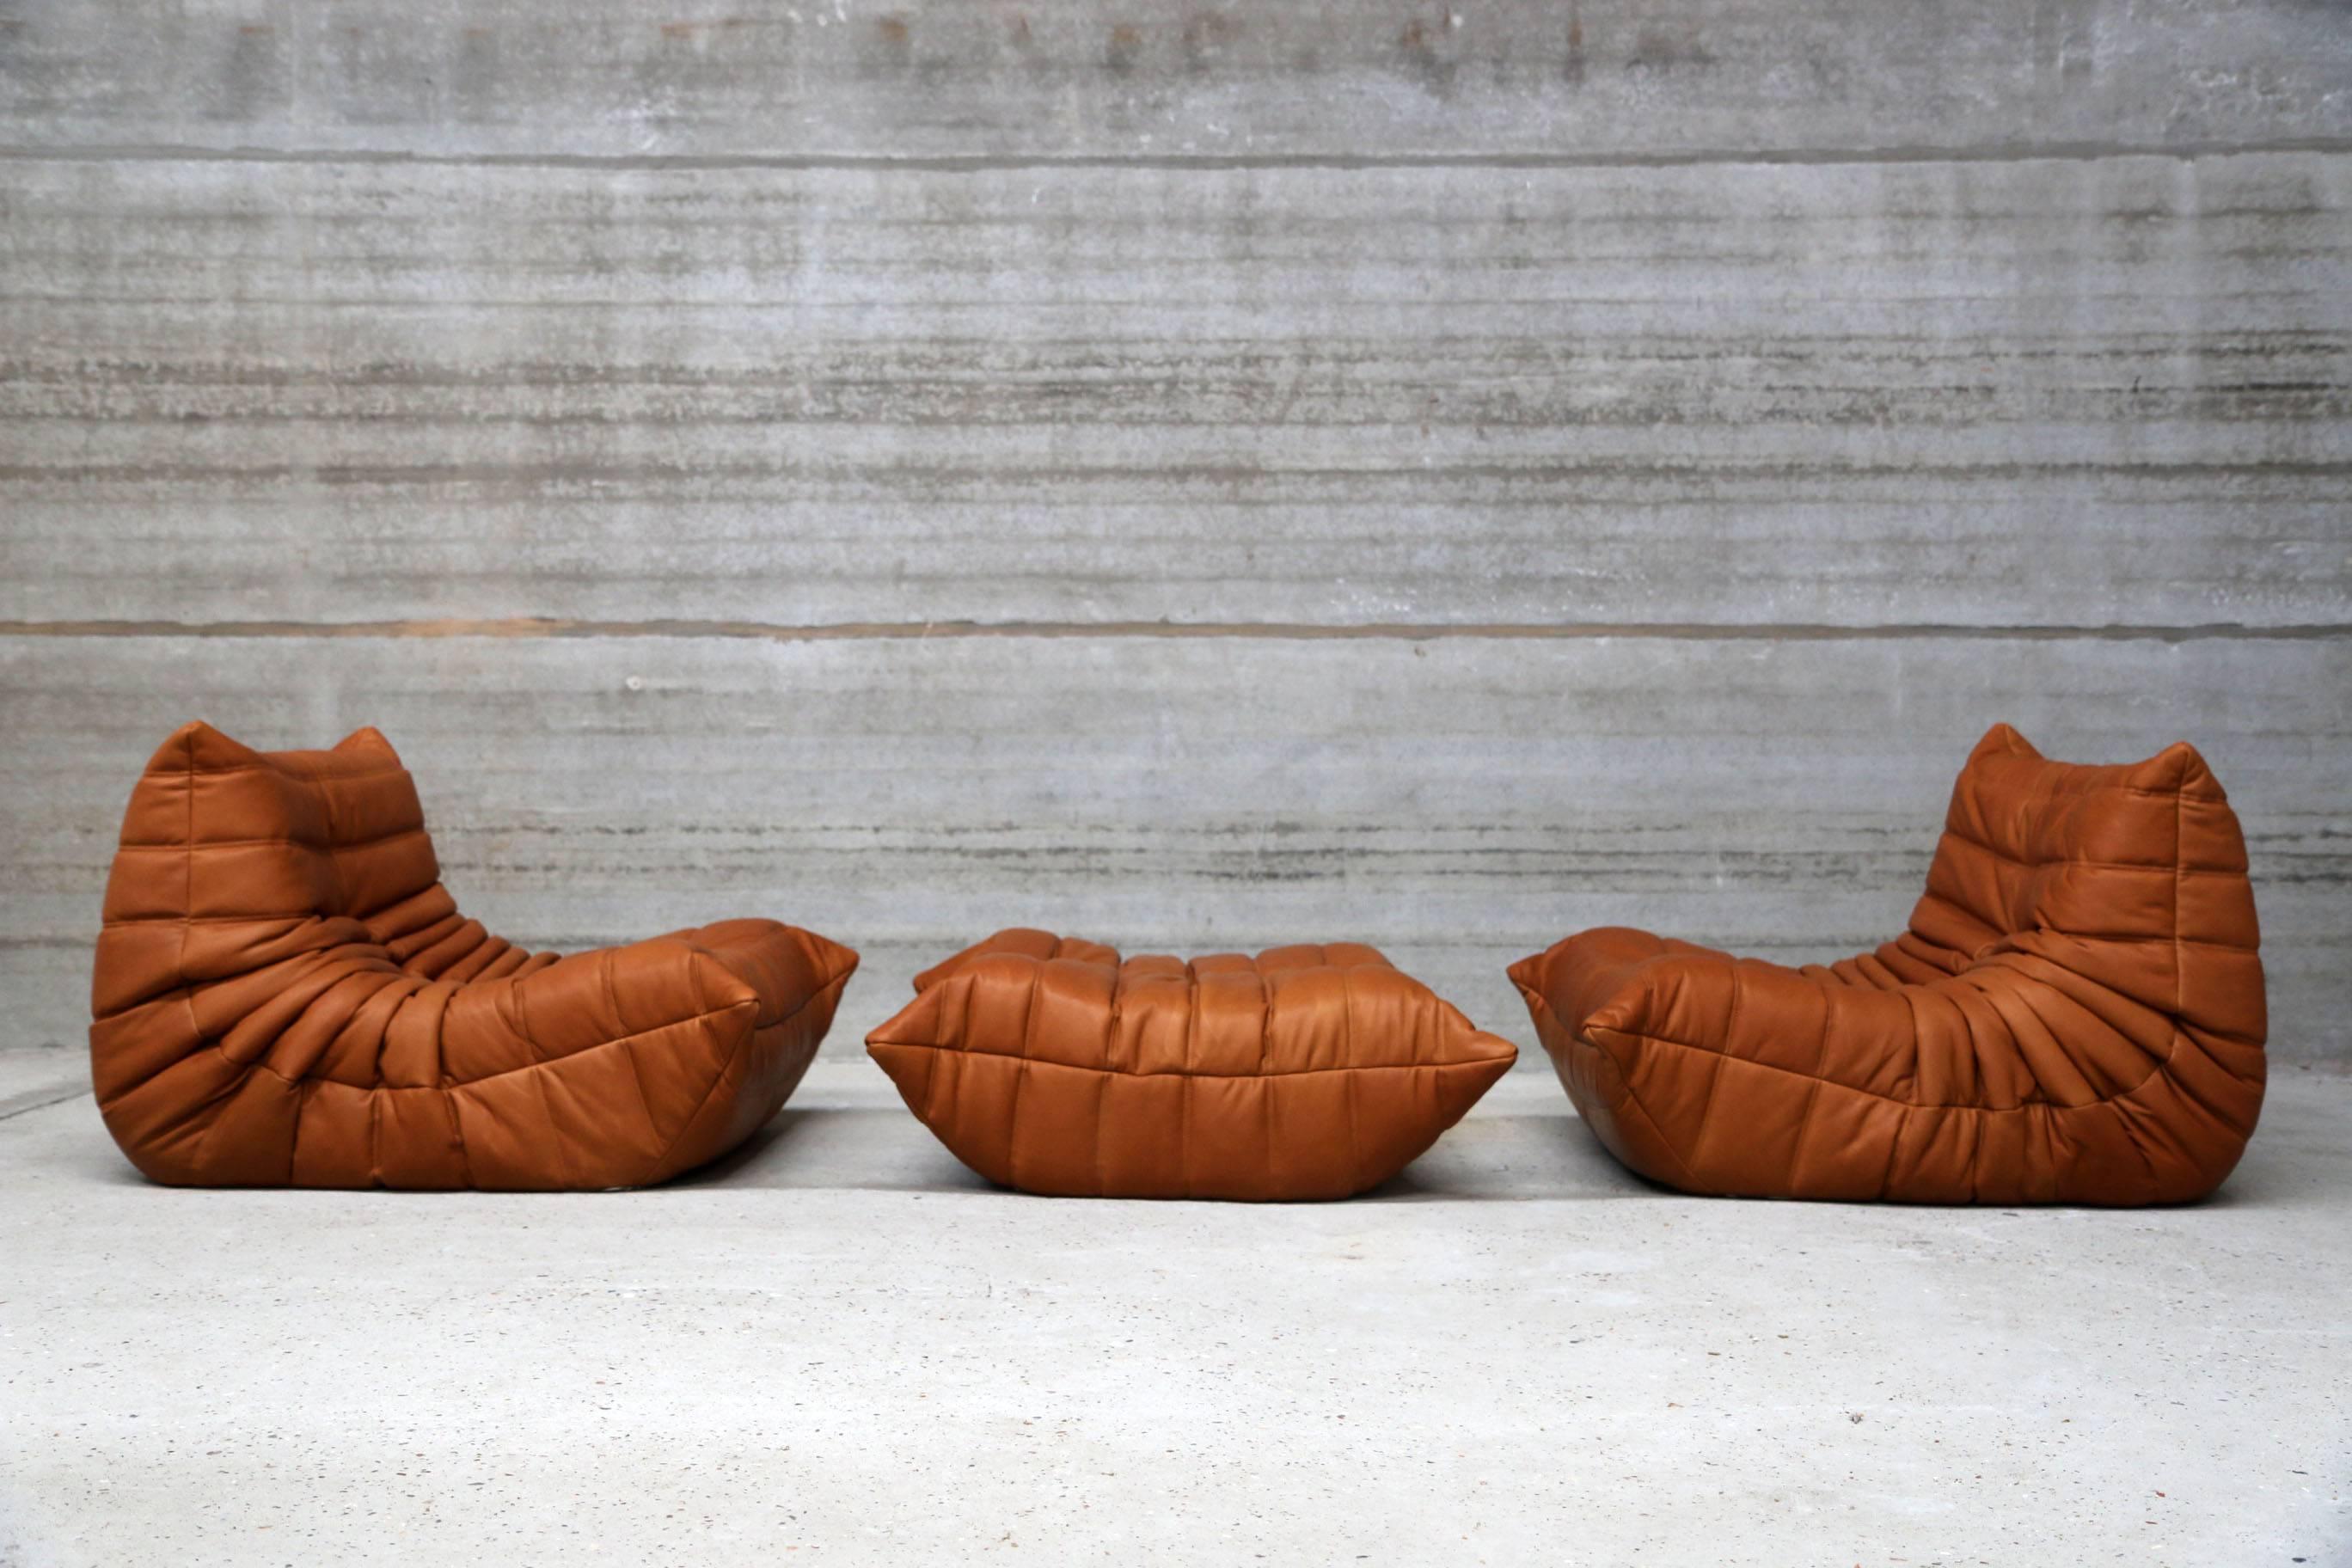 Two single seat lounge chairs and pouf, model Togo from Ligne Roset designed by Michel Ducaroy.
Re-upholstered by funkyvintage in their signature full grain cognac leather. Our leather is biologically colored and feels warm and comfortable. Top